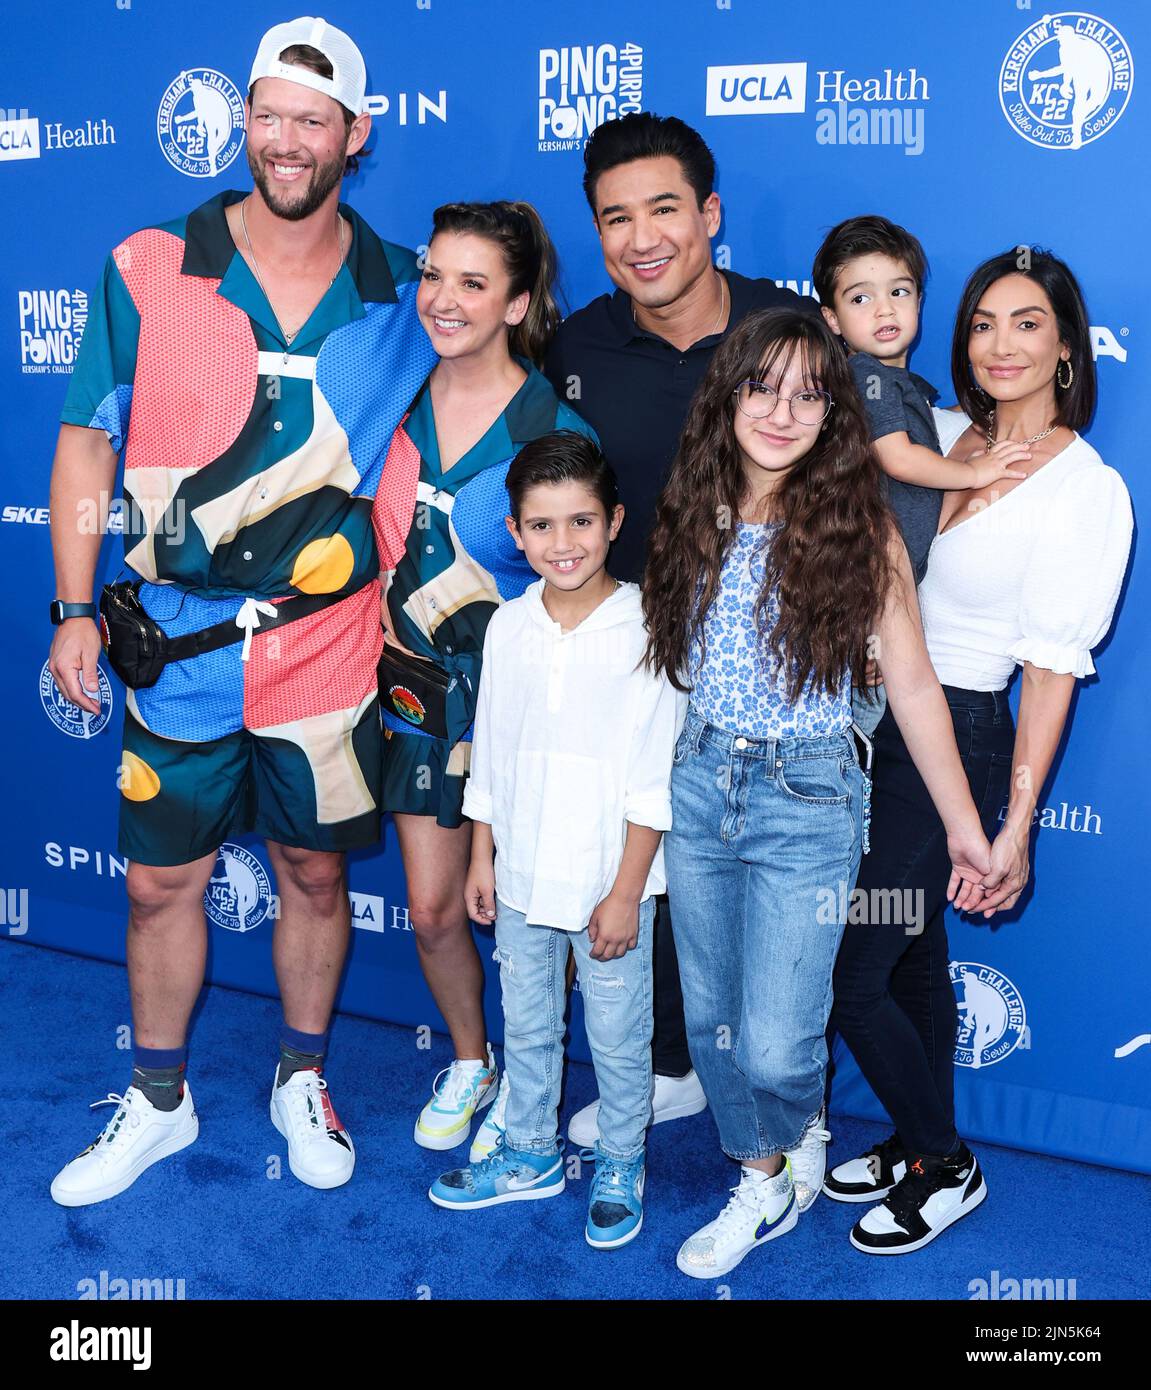 ELYSIAN PARK, LOS ANGELES, CALIFORNIA, USA - AUGUST 08: Clayton Kershaw, Ellen Kershaw, Mario Lopez, Courtney Laine Mazza, Gia Francesca Lopez, Santino Rafael Lopez and Dominic Lopez arrive at Kershaw's Challenge Ping Pong 4 Purpose 2022 held at Dodger Stadium on August 8, 2022 in Elysian Park, Los Angeles, California, United States. (Photo by Xavier Collin/Image Press Agency) Stock Photo